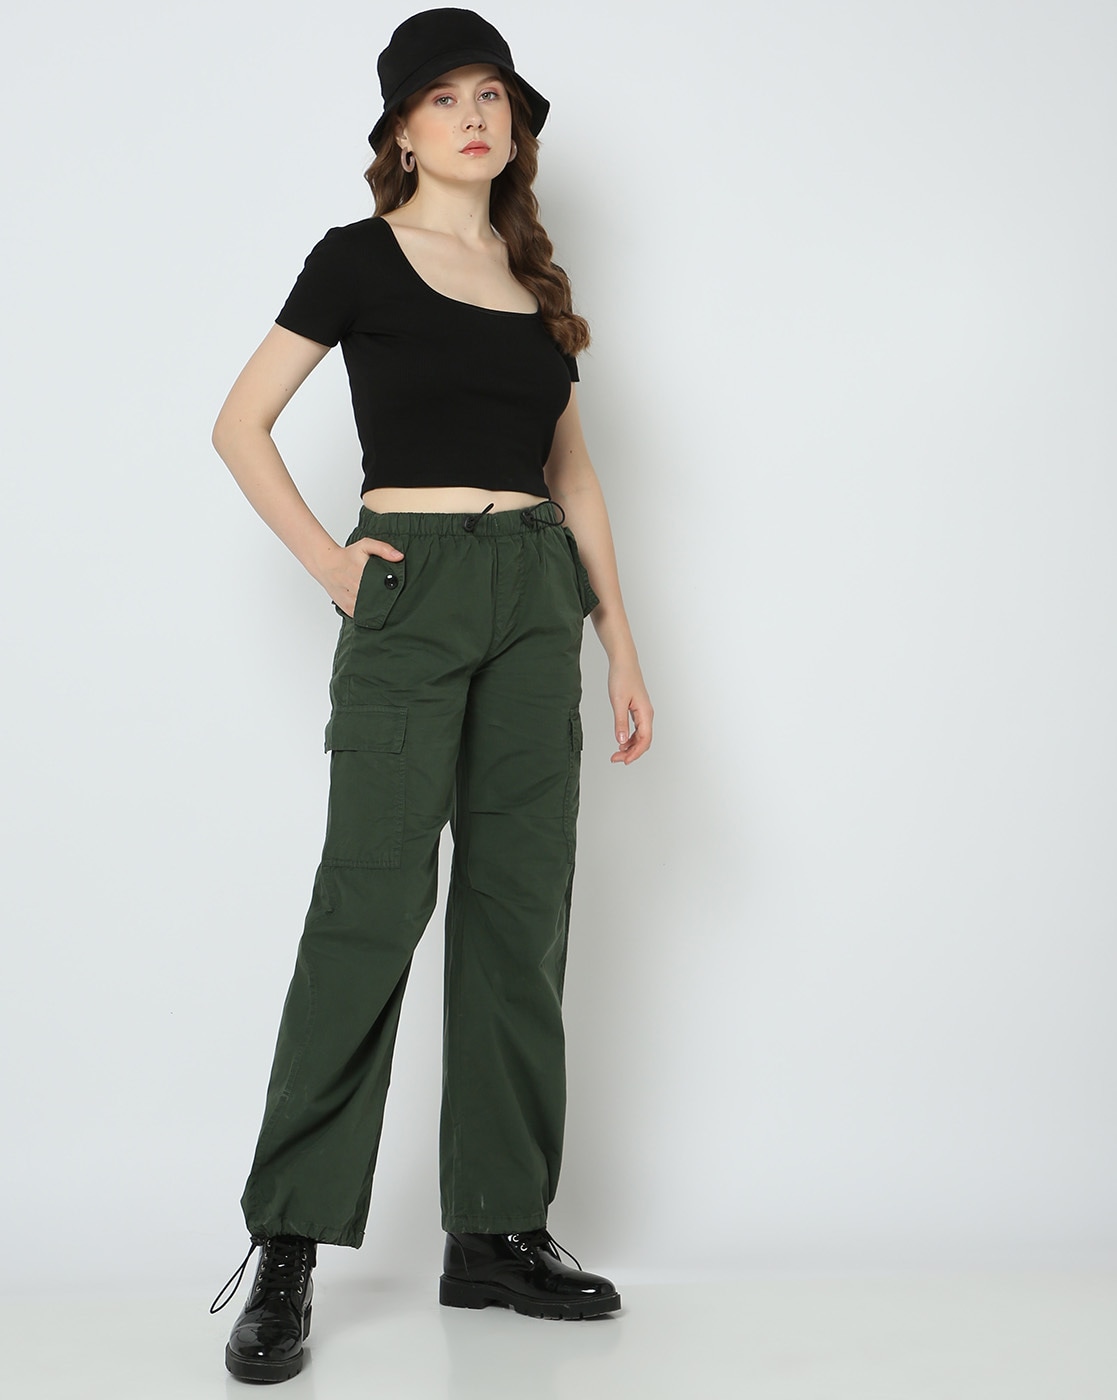 RQYYD Cargo Pants Women Casual Loose High Waisted Straight Leg Baggy Pants  Trousers Lightweight Outdoor Travel Pants with Pockets(Army Green,M) -  Walmart.com